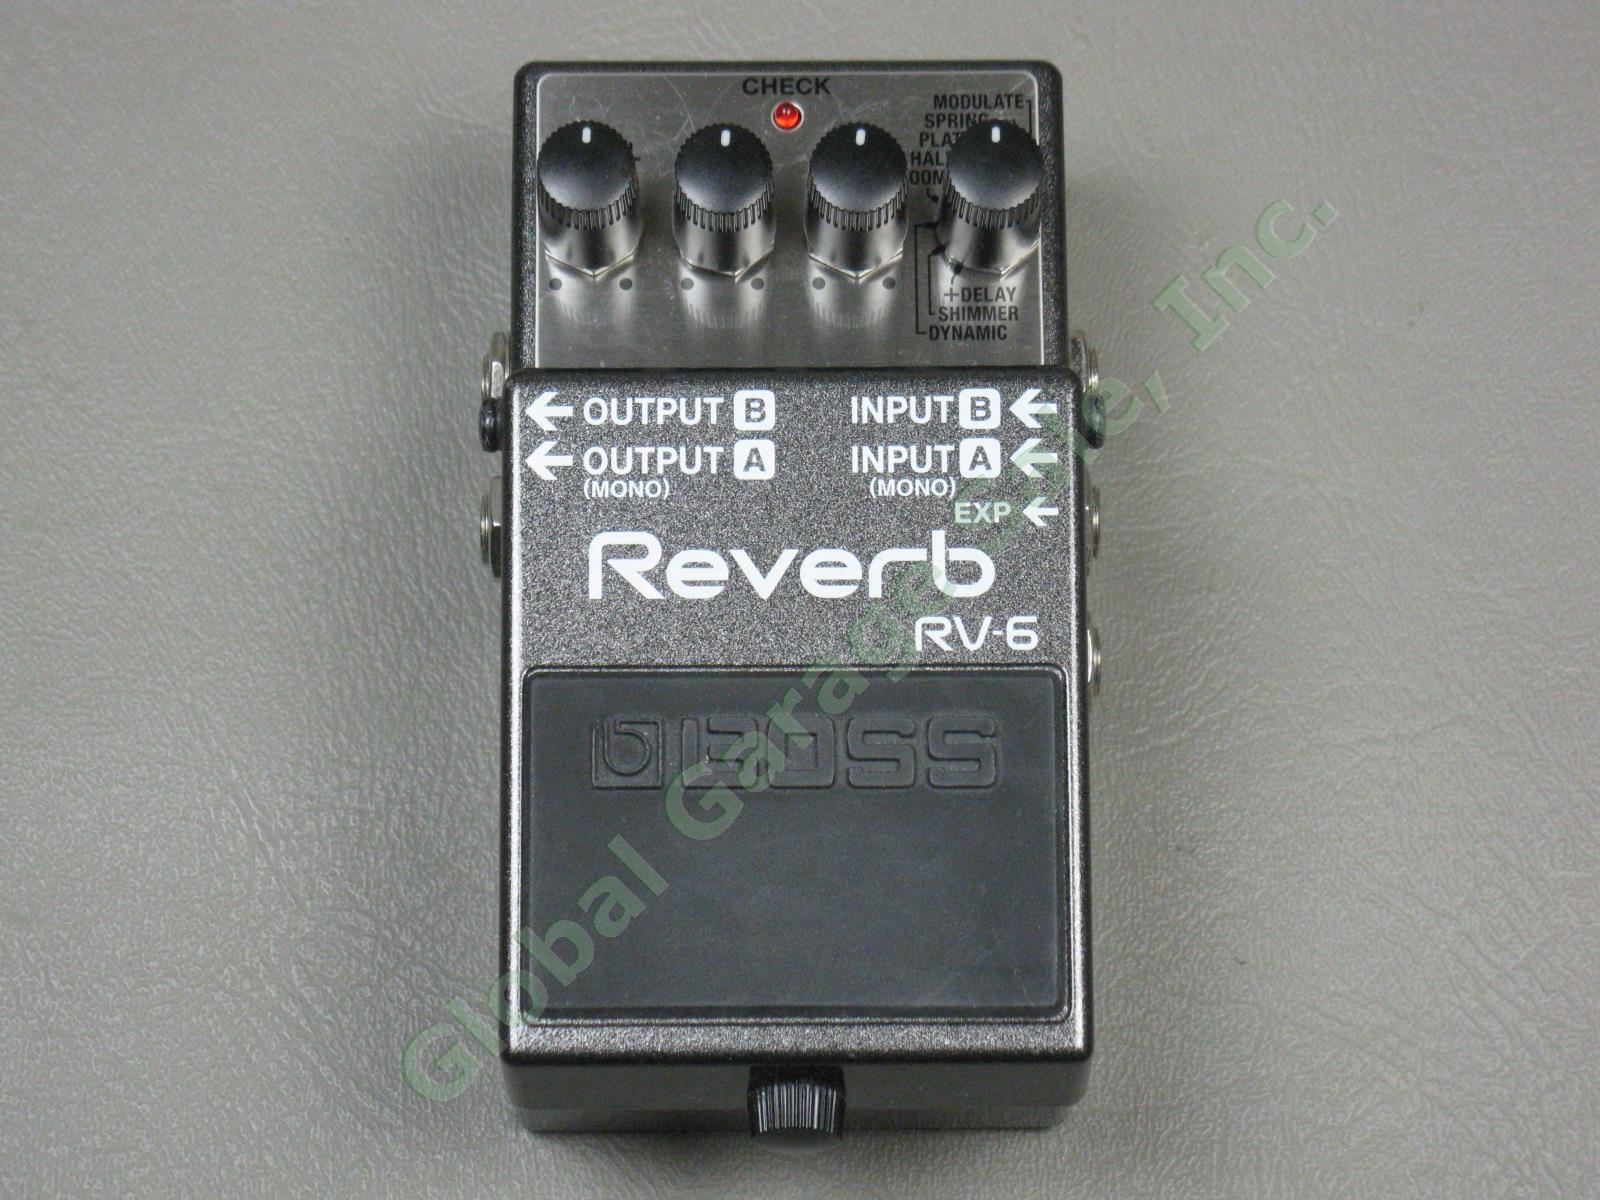 Boss RV-6 Digital Reverb Guitar Effects Pedal Stomp Box One Owner EXC Condition!